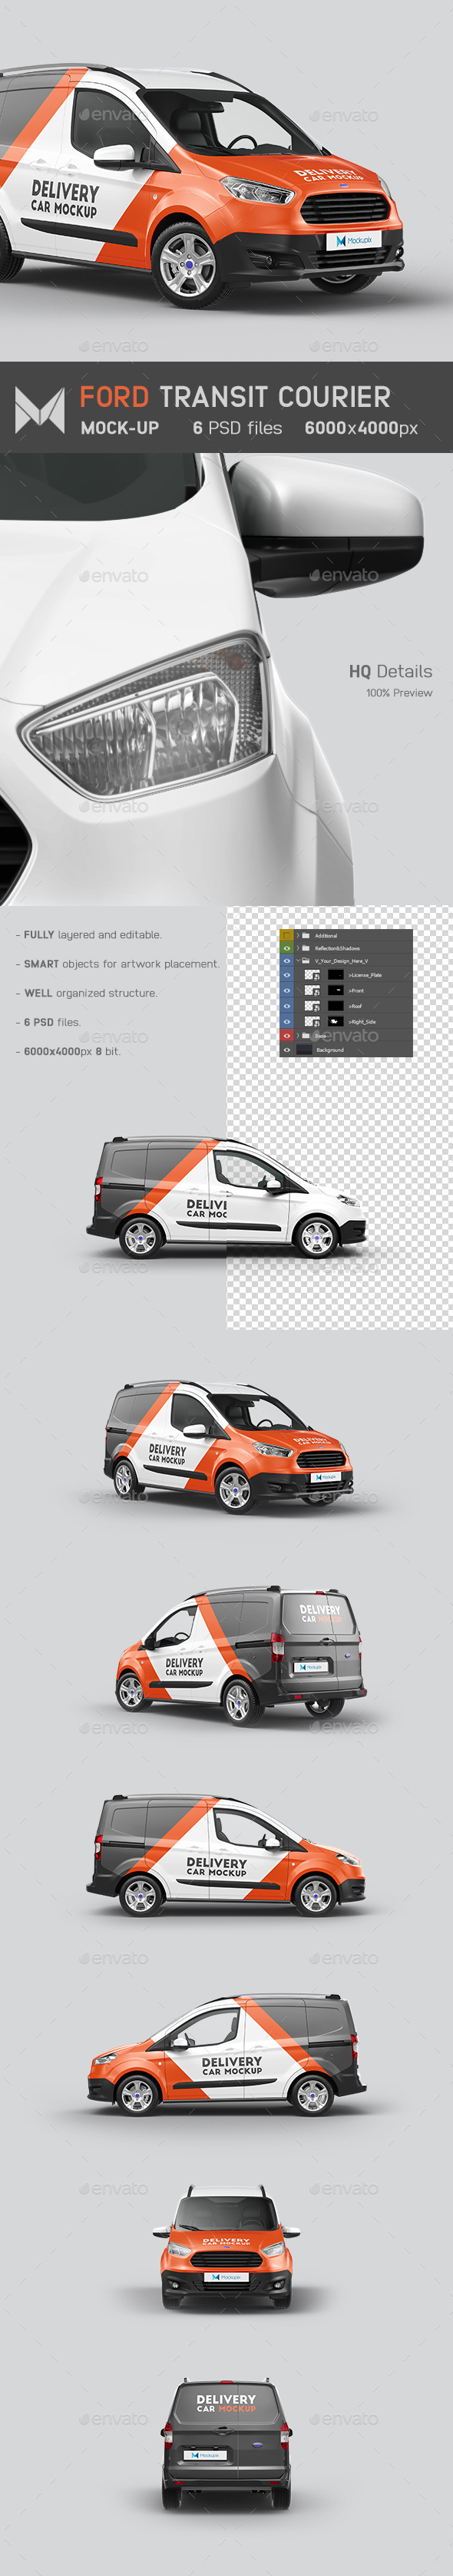 Ford Transit Courier Mockup